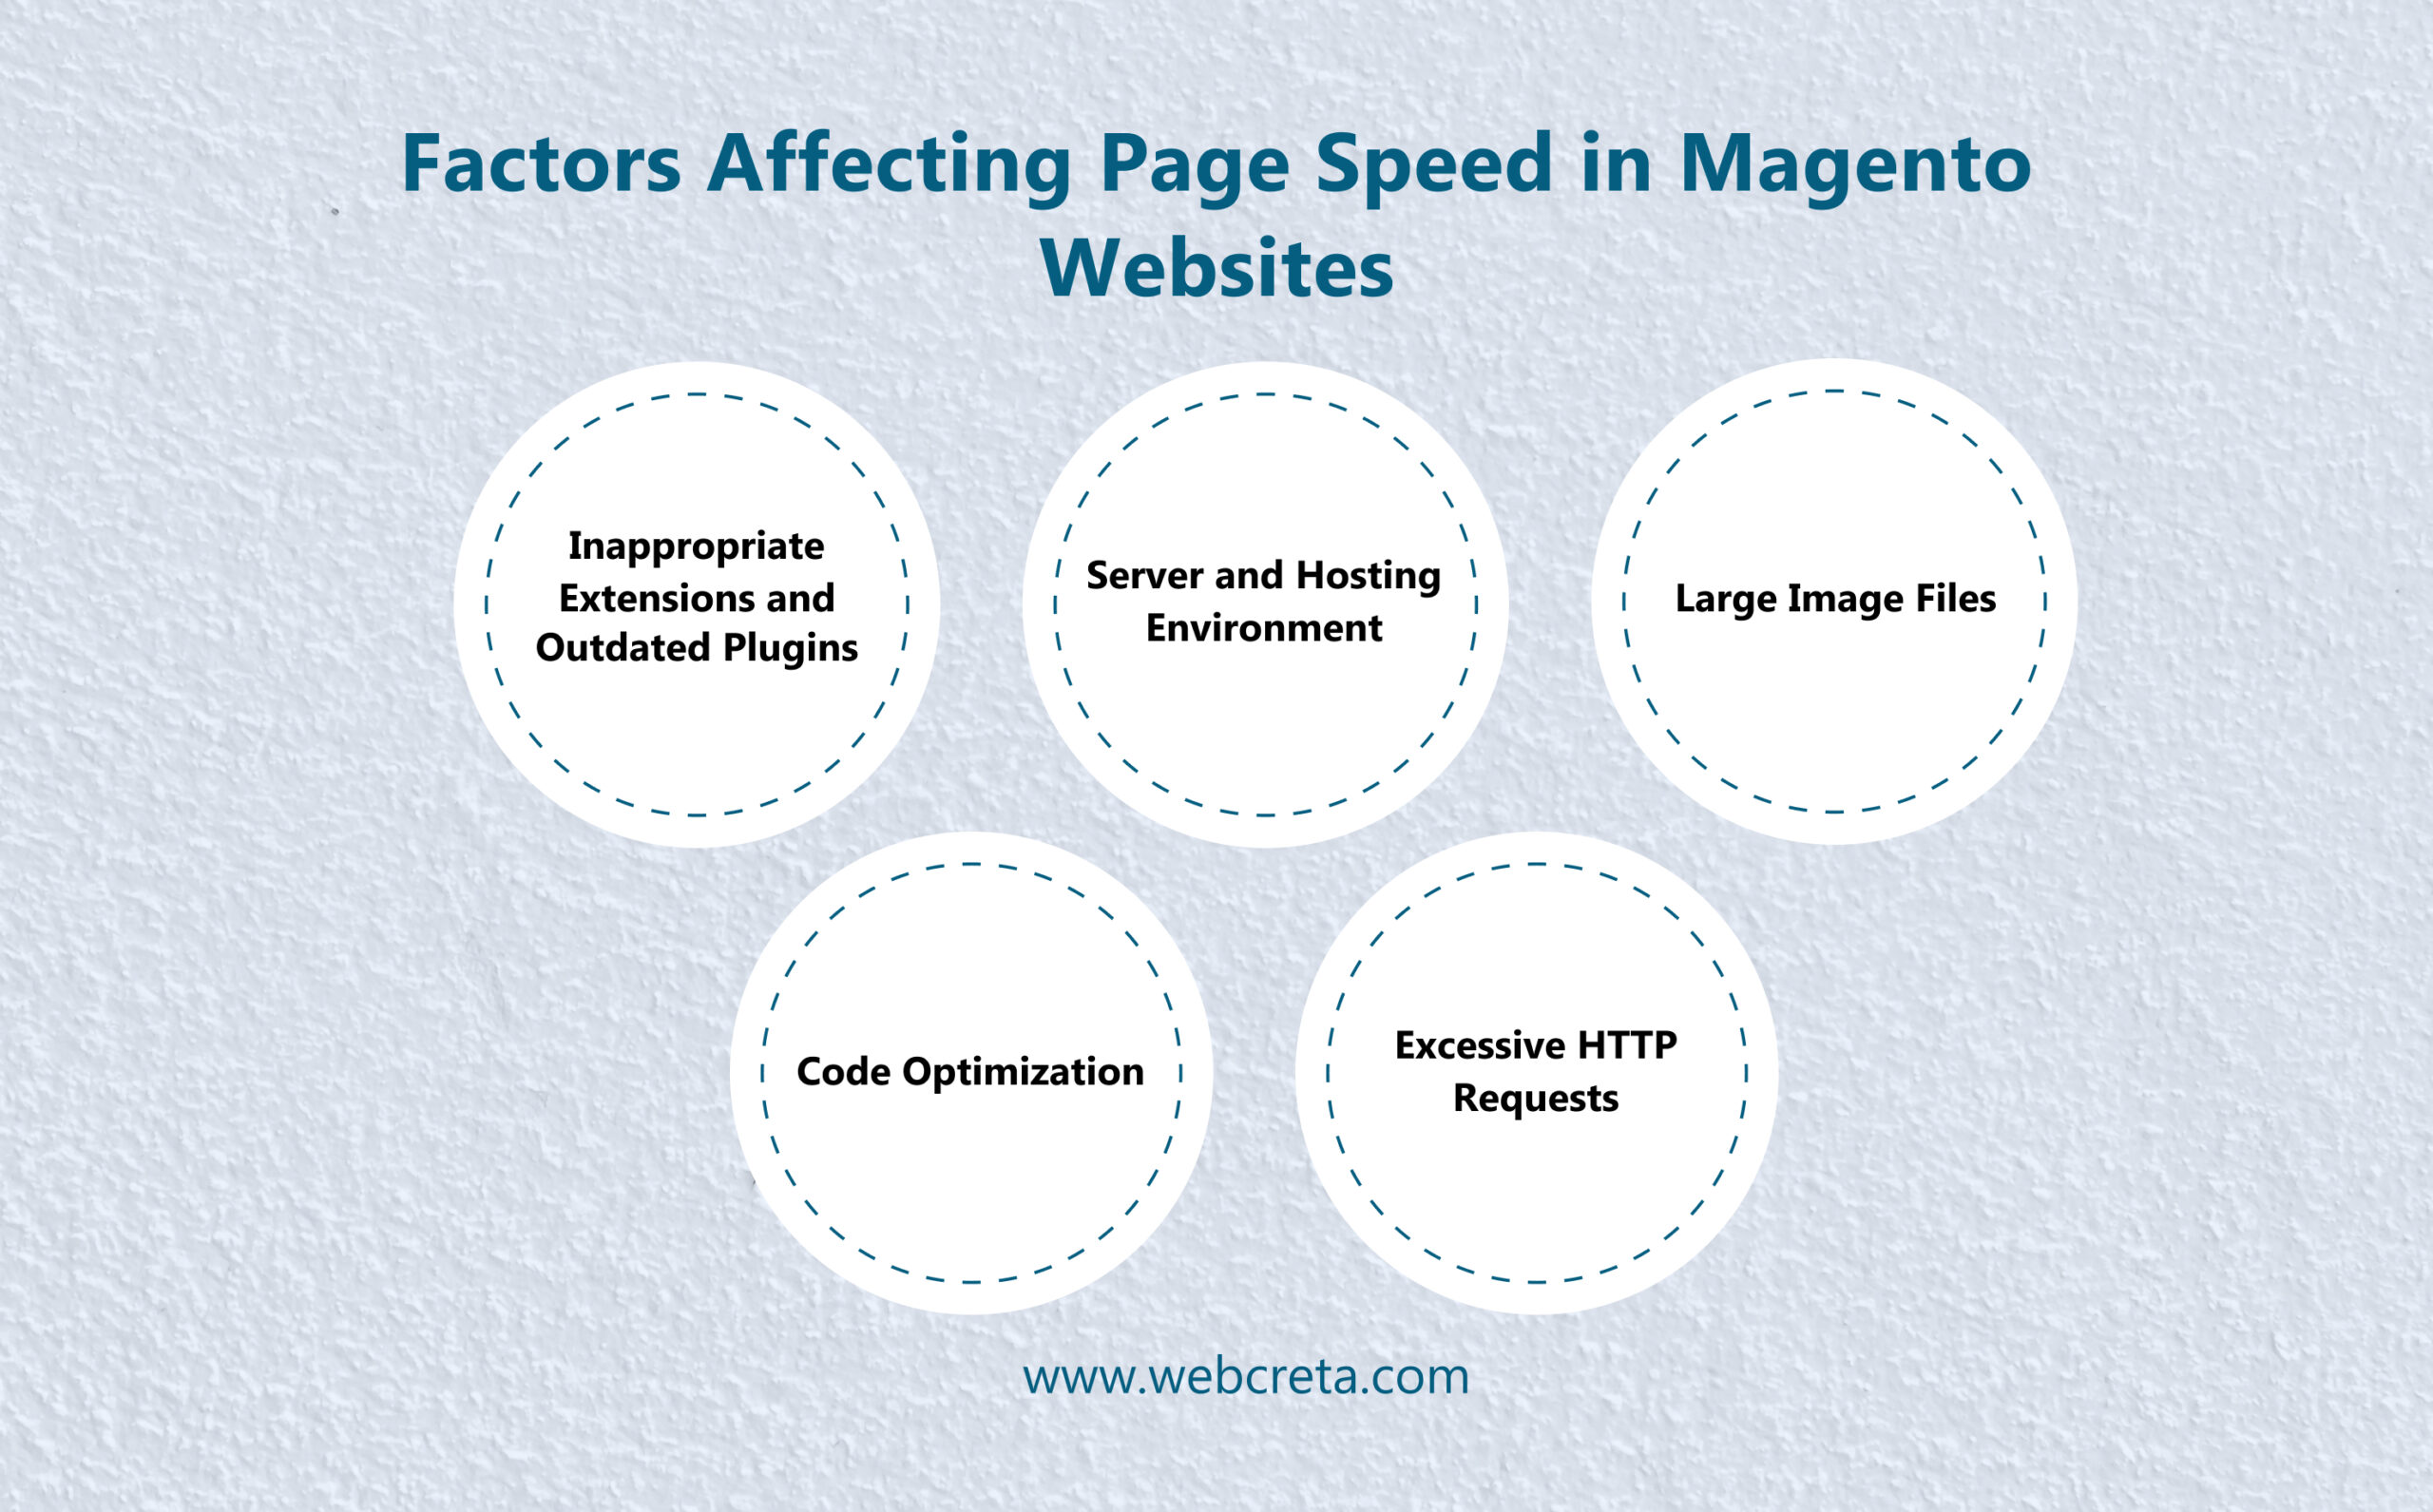 Factors Affecting Page Speed in Magento Websites